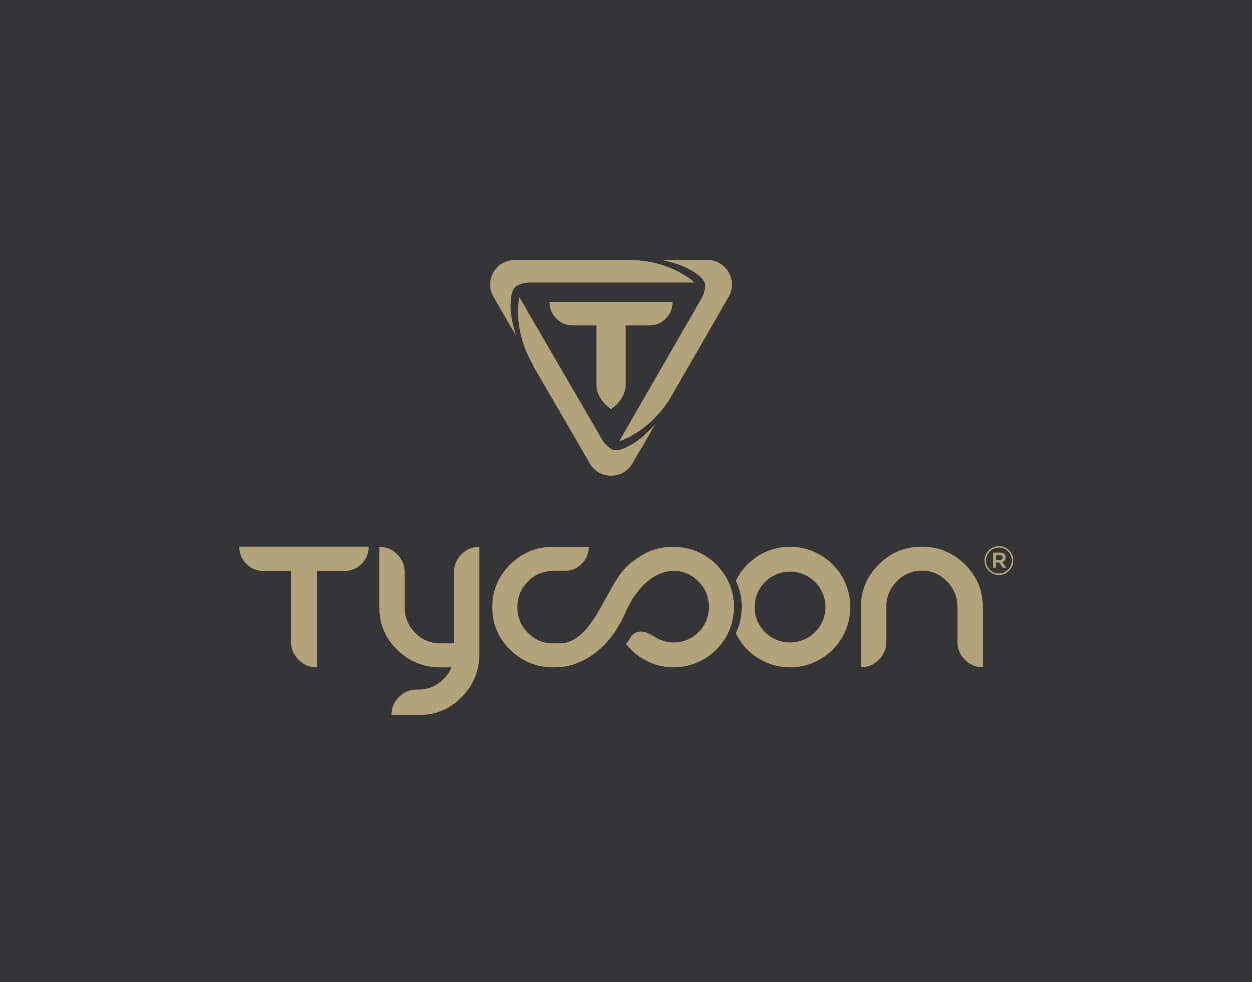 Tycoon_withouttagline_colors-01